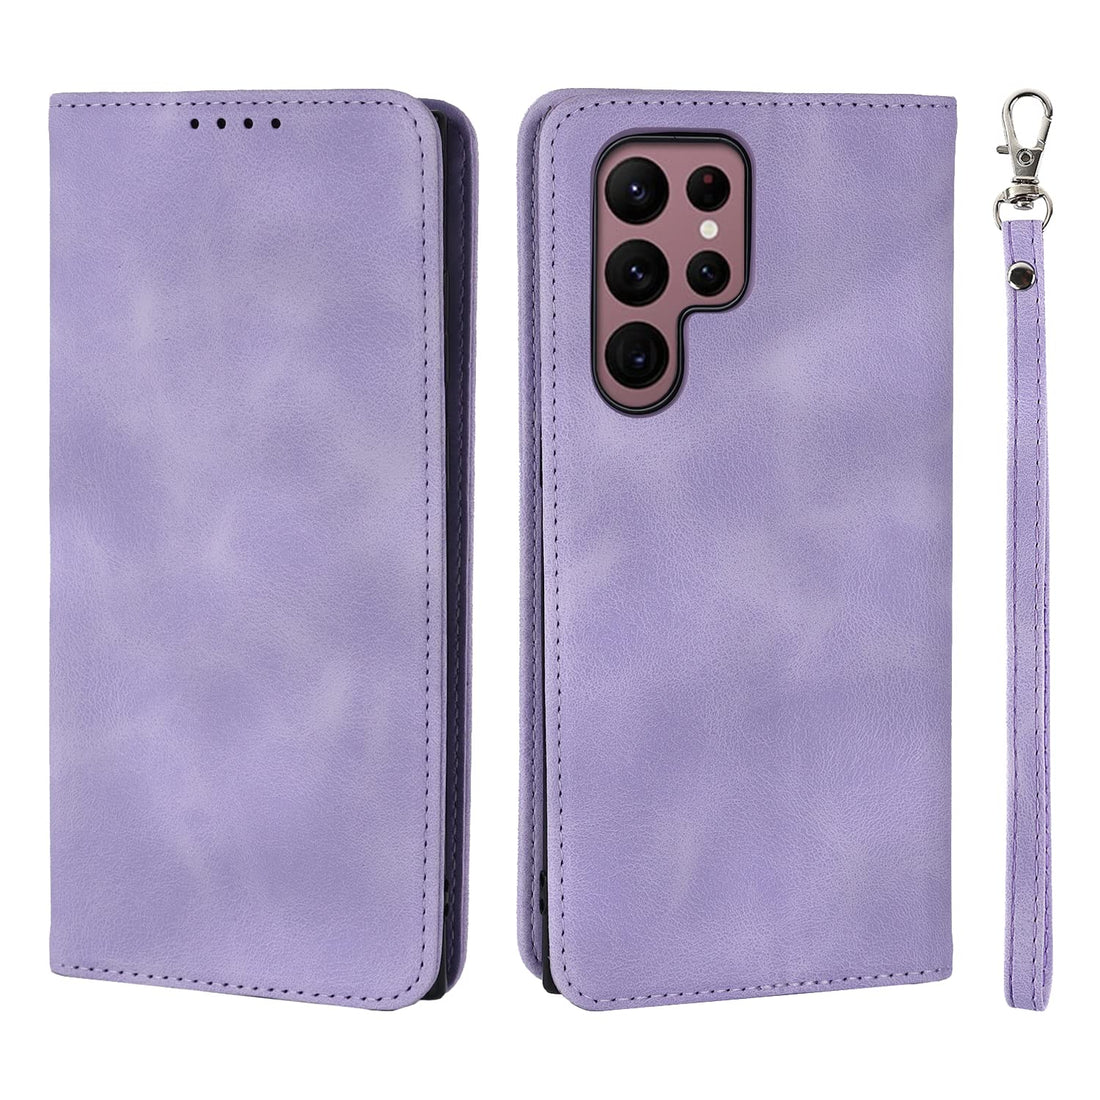 Ｈａｖａｙａ Funda para Samsung Galaxy S22 Ultra Wallet Case with Card Holder - Flip Cell Phone case with Wrist Strap for Galaxy S22 Ultra 5G - Fruit Purple